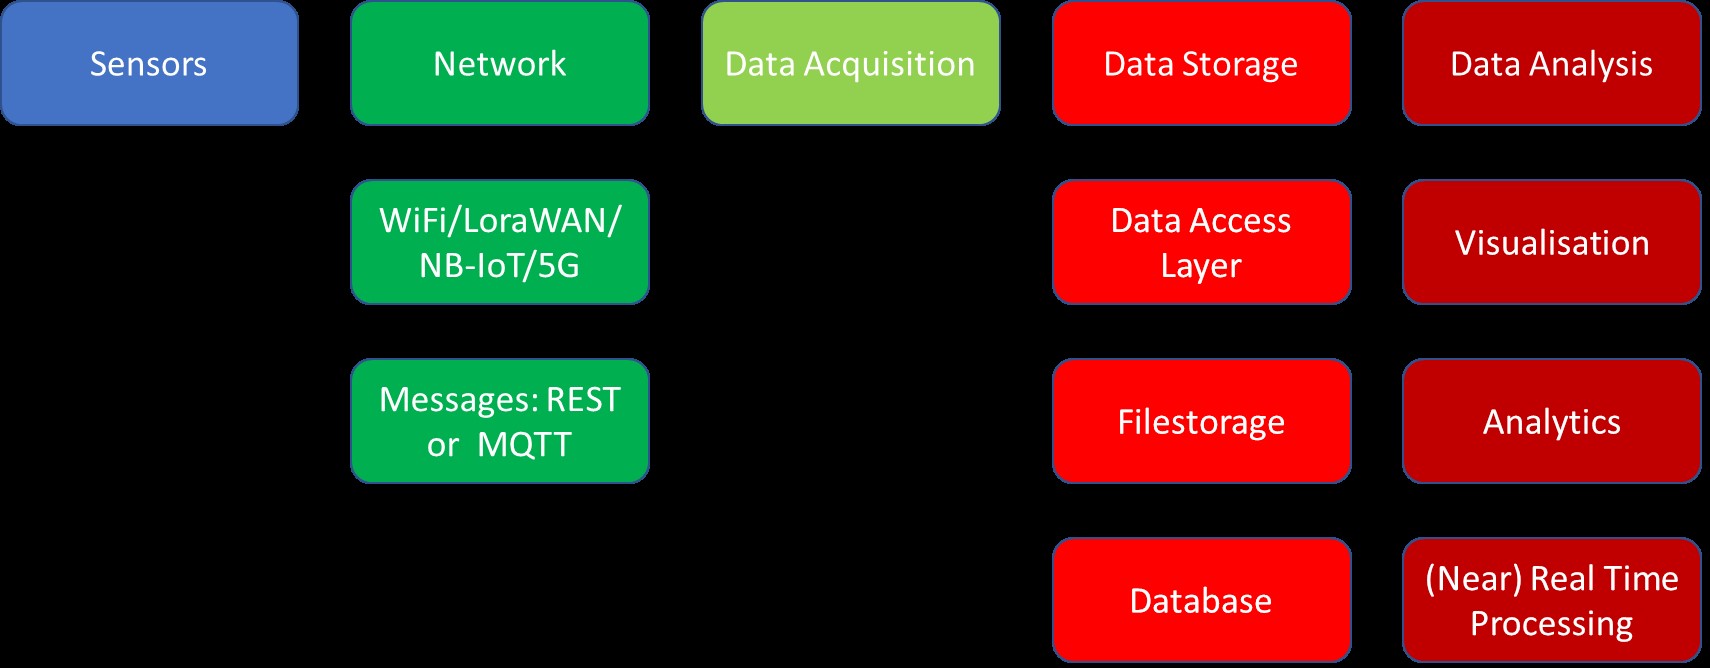 Figure 1: Expected components in the Sensor Data Platform